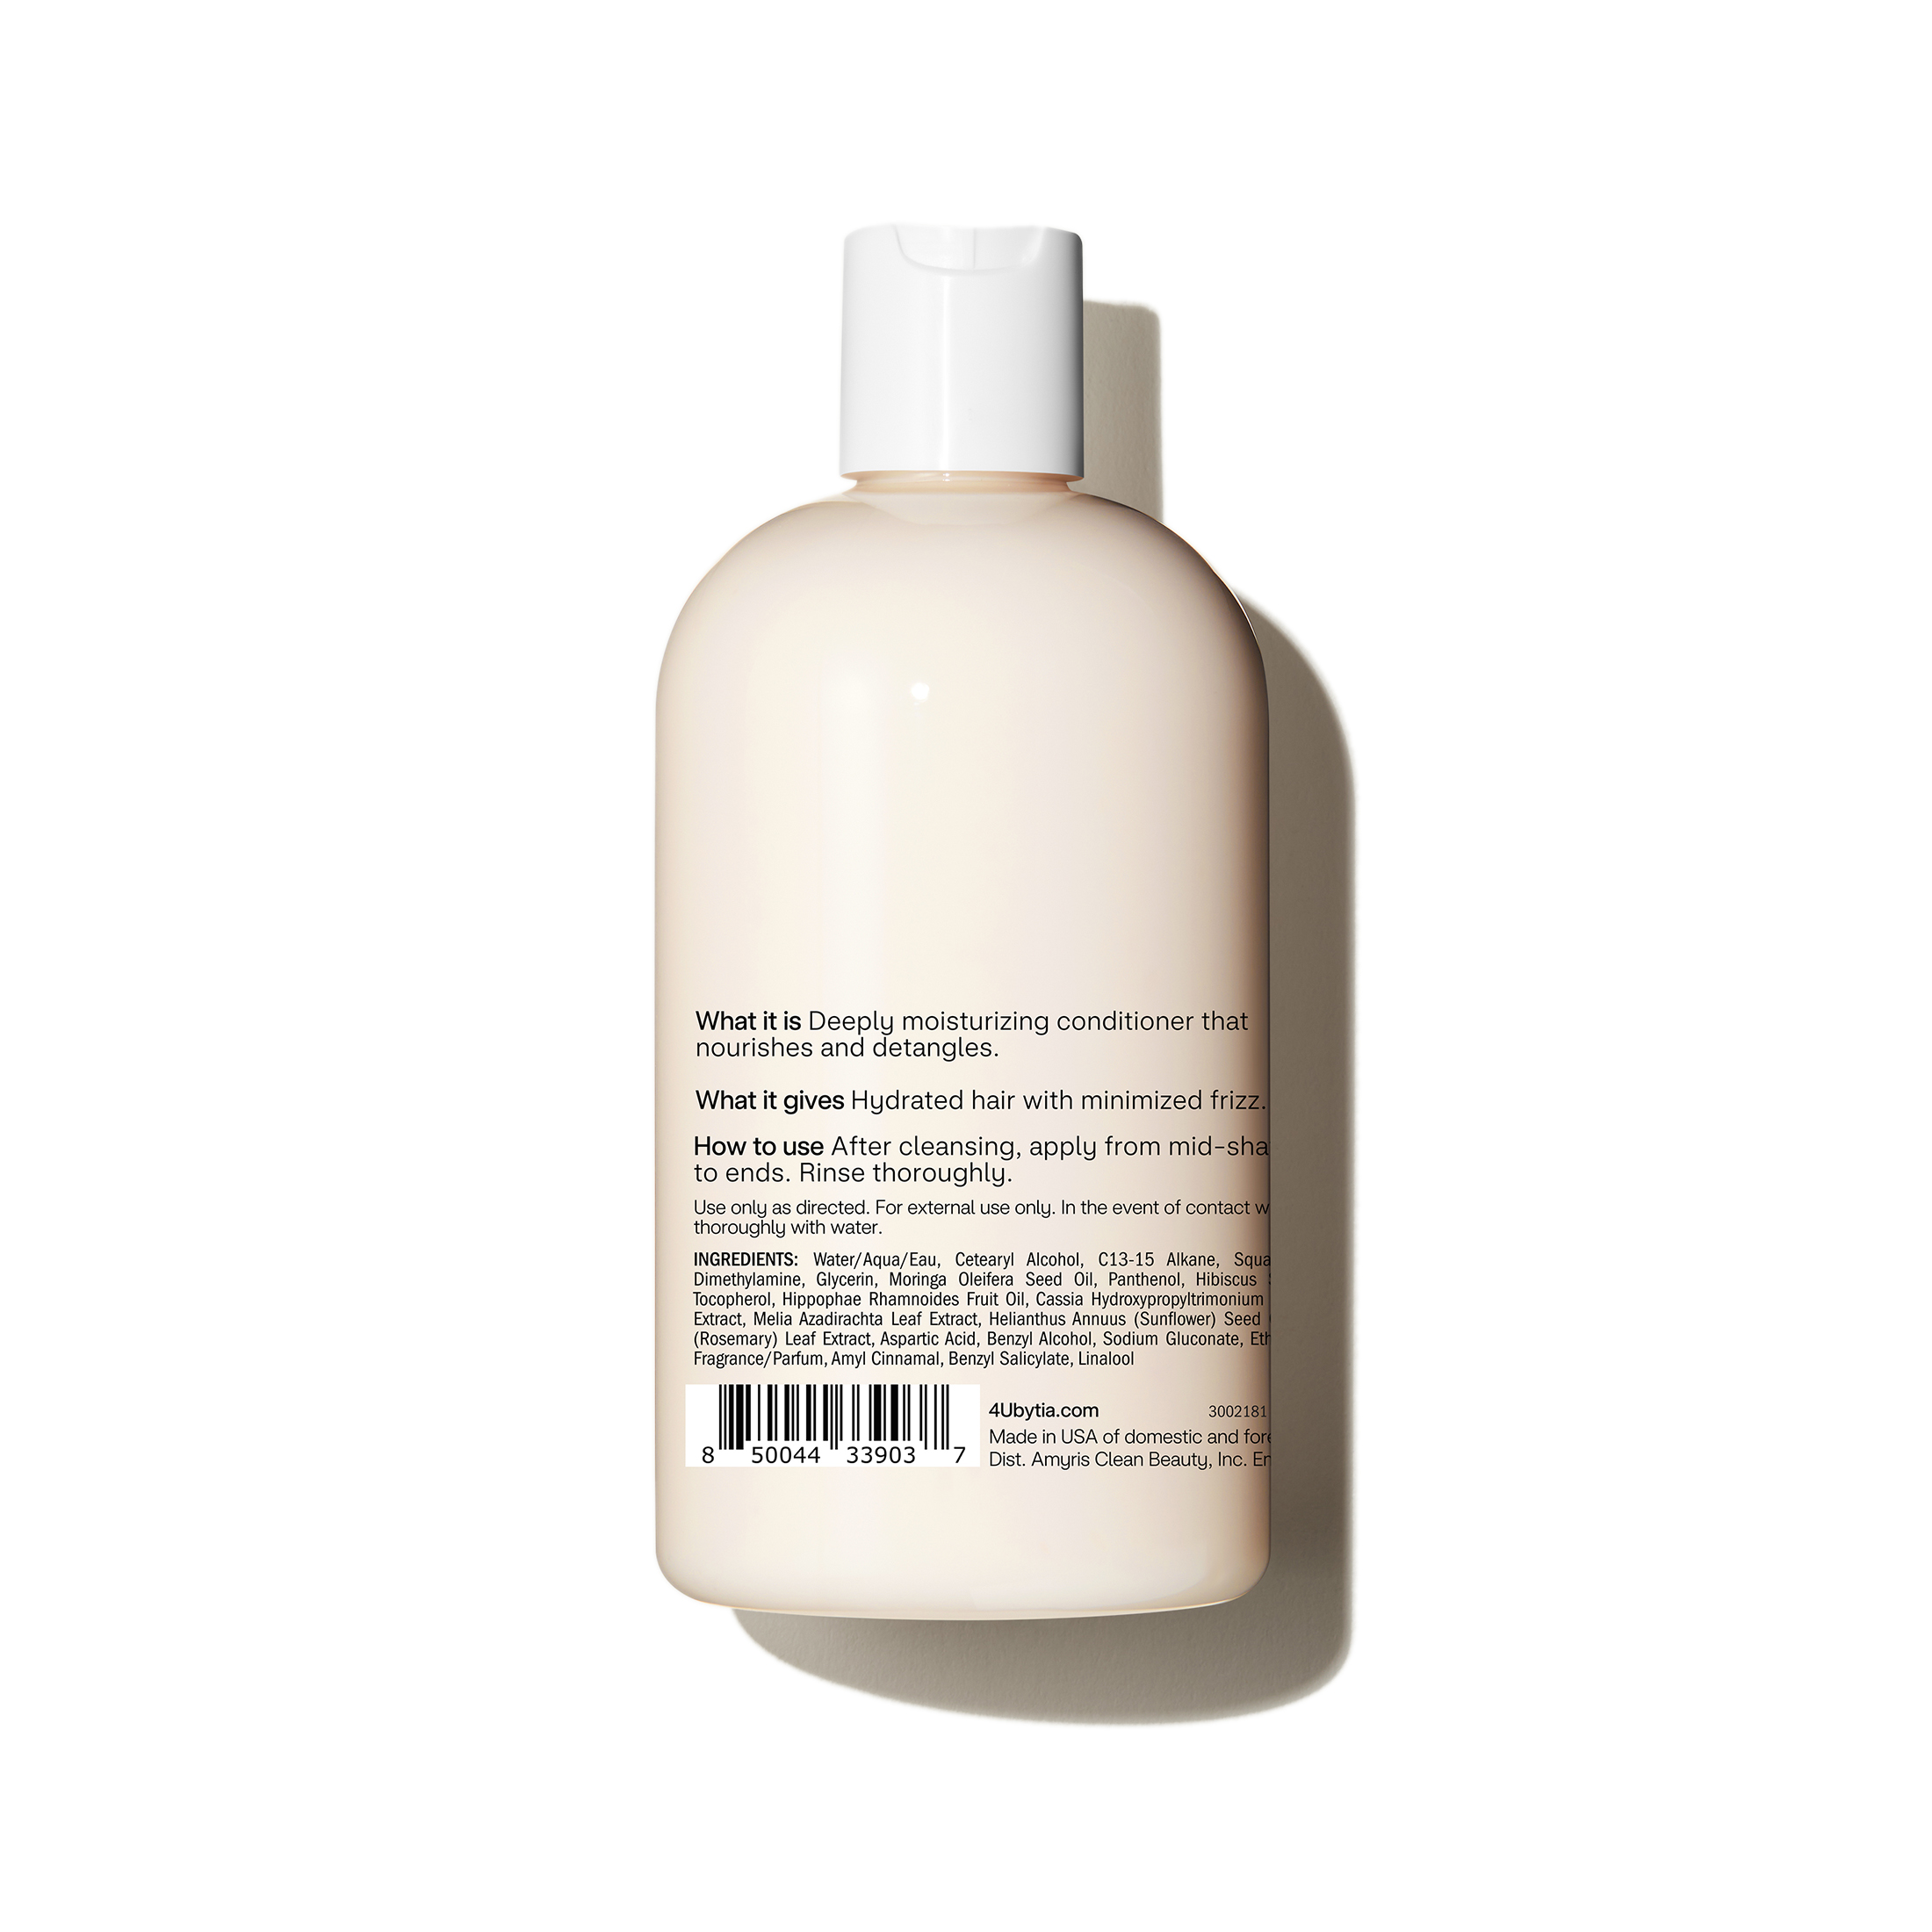 4U by Tia Moisturizing Conditioner with Hibiscus and Hemi15, 12 fl oz - image 3 of 10